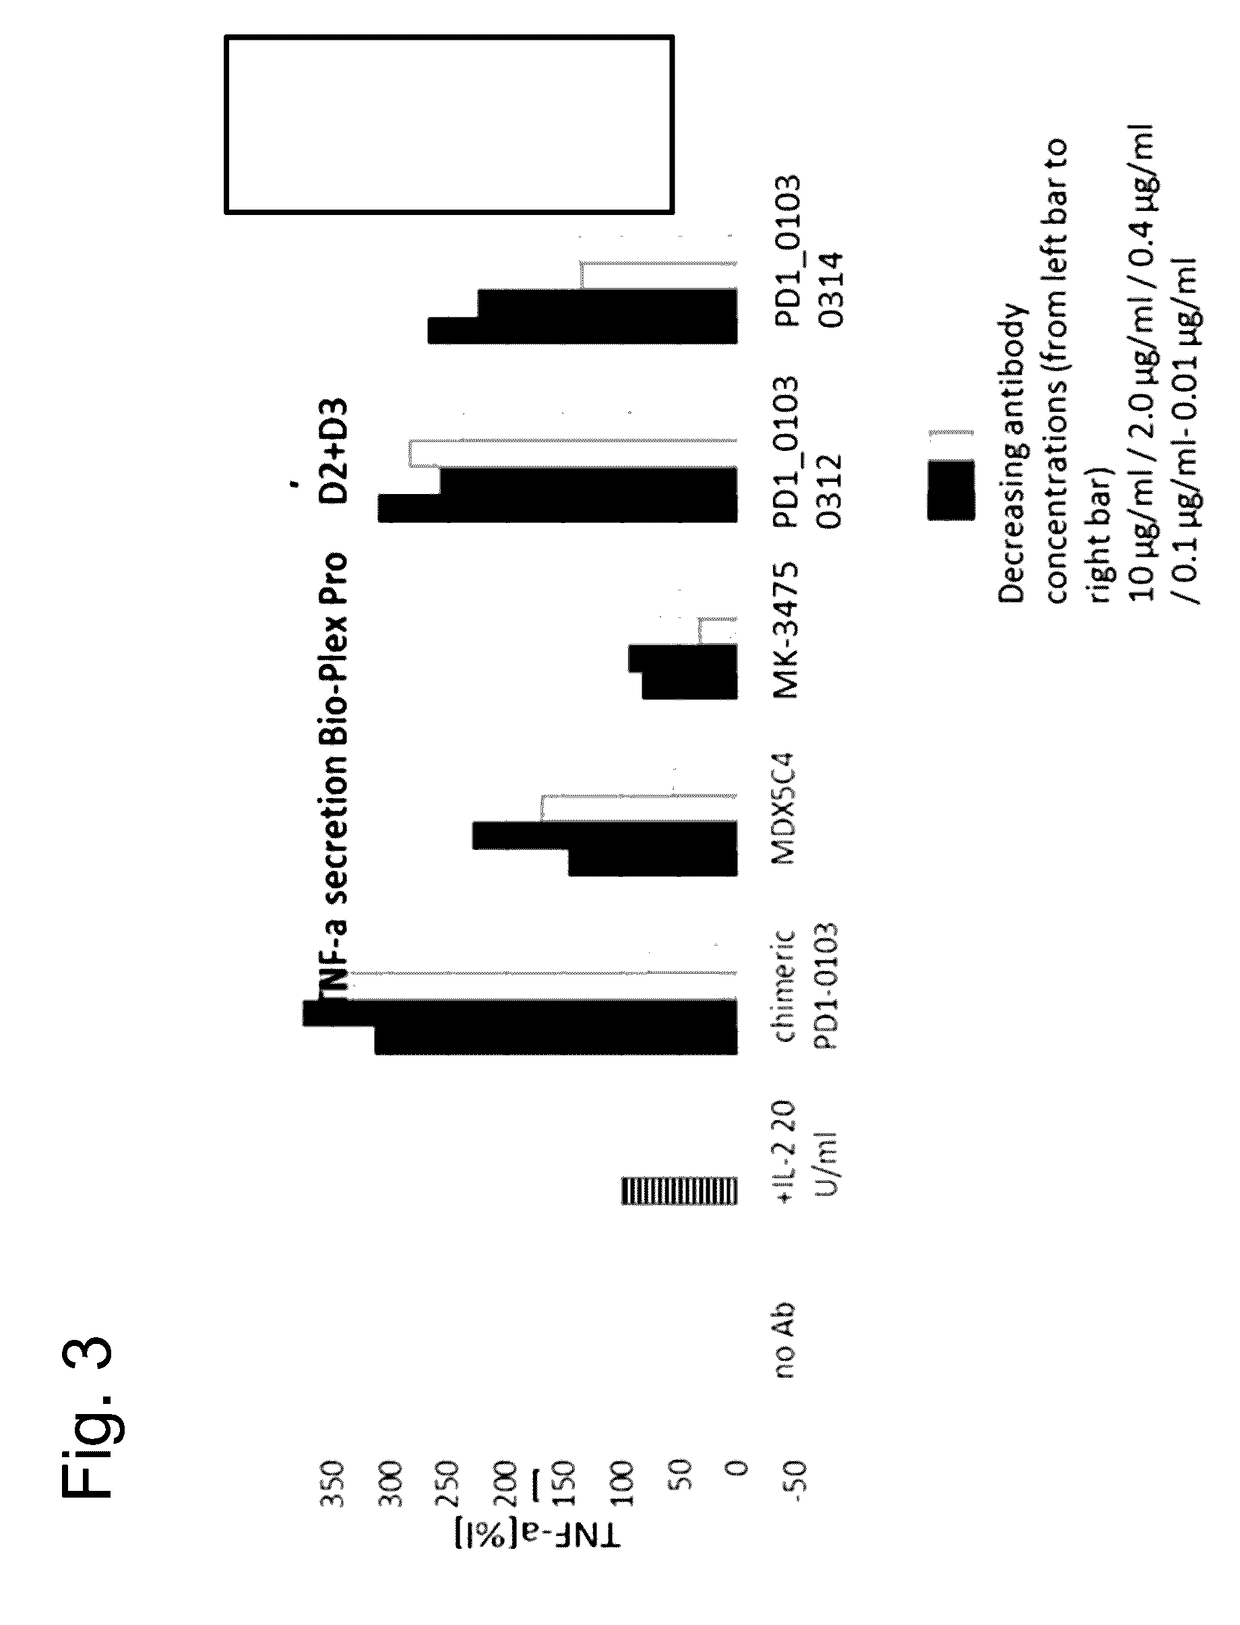 Bispecific antibodies specific for pd1 and tim3